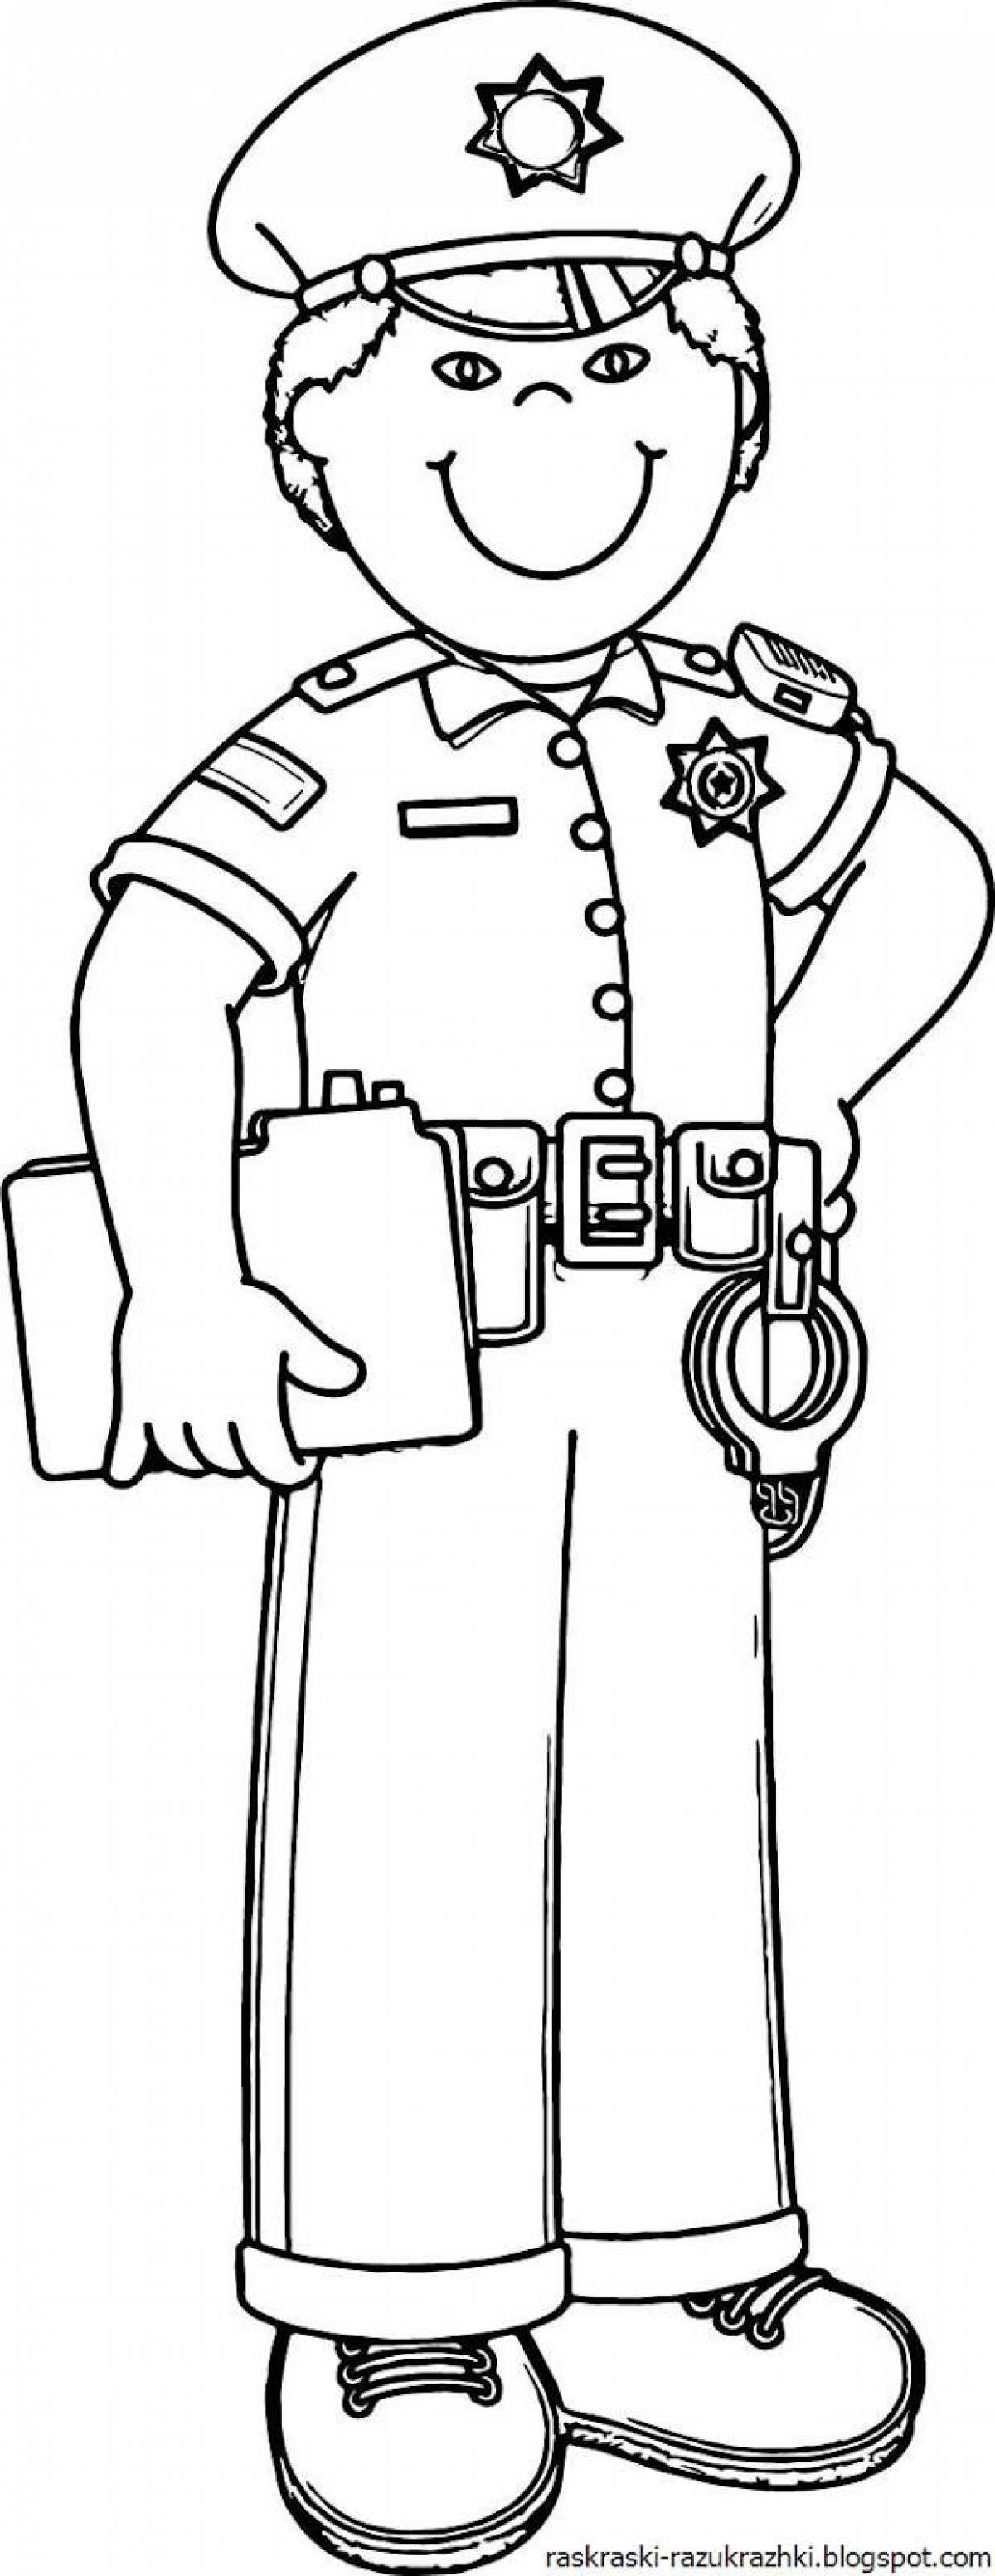 Animated police coloring book for kids